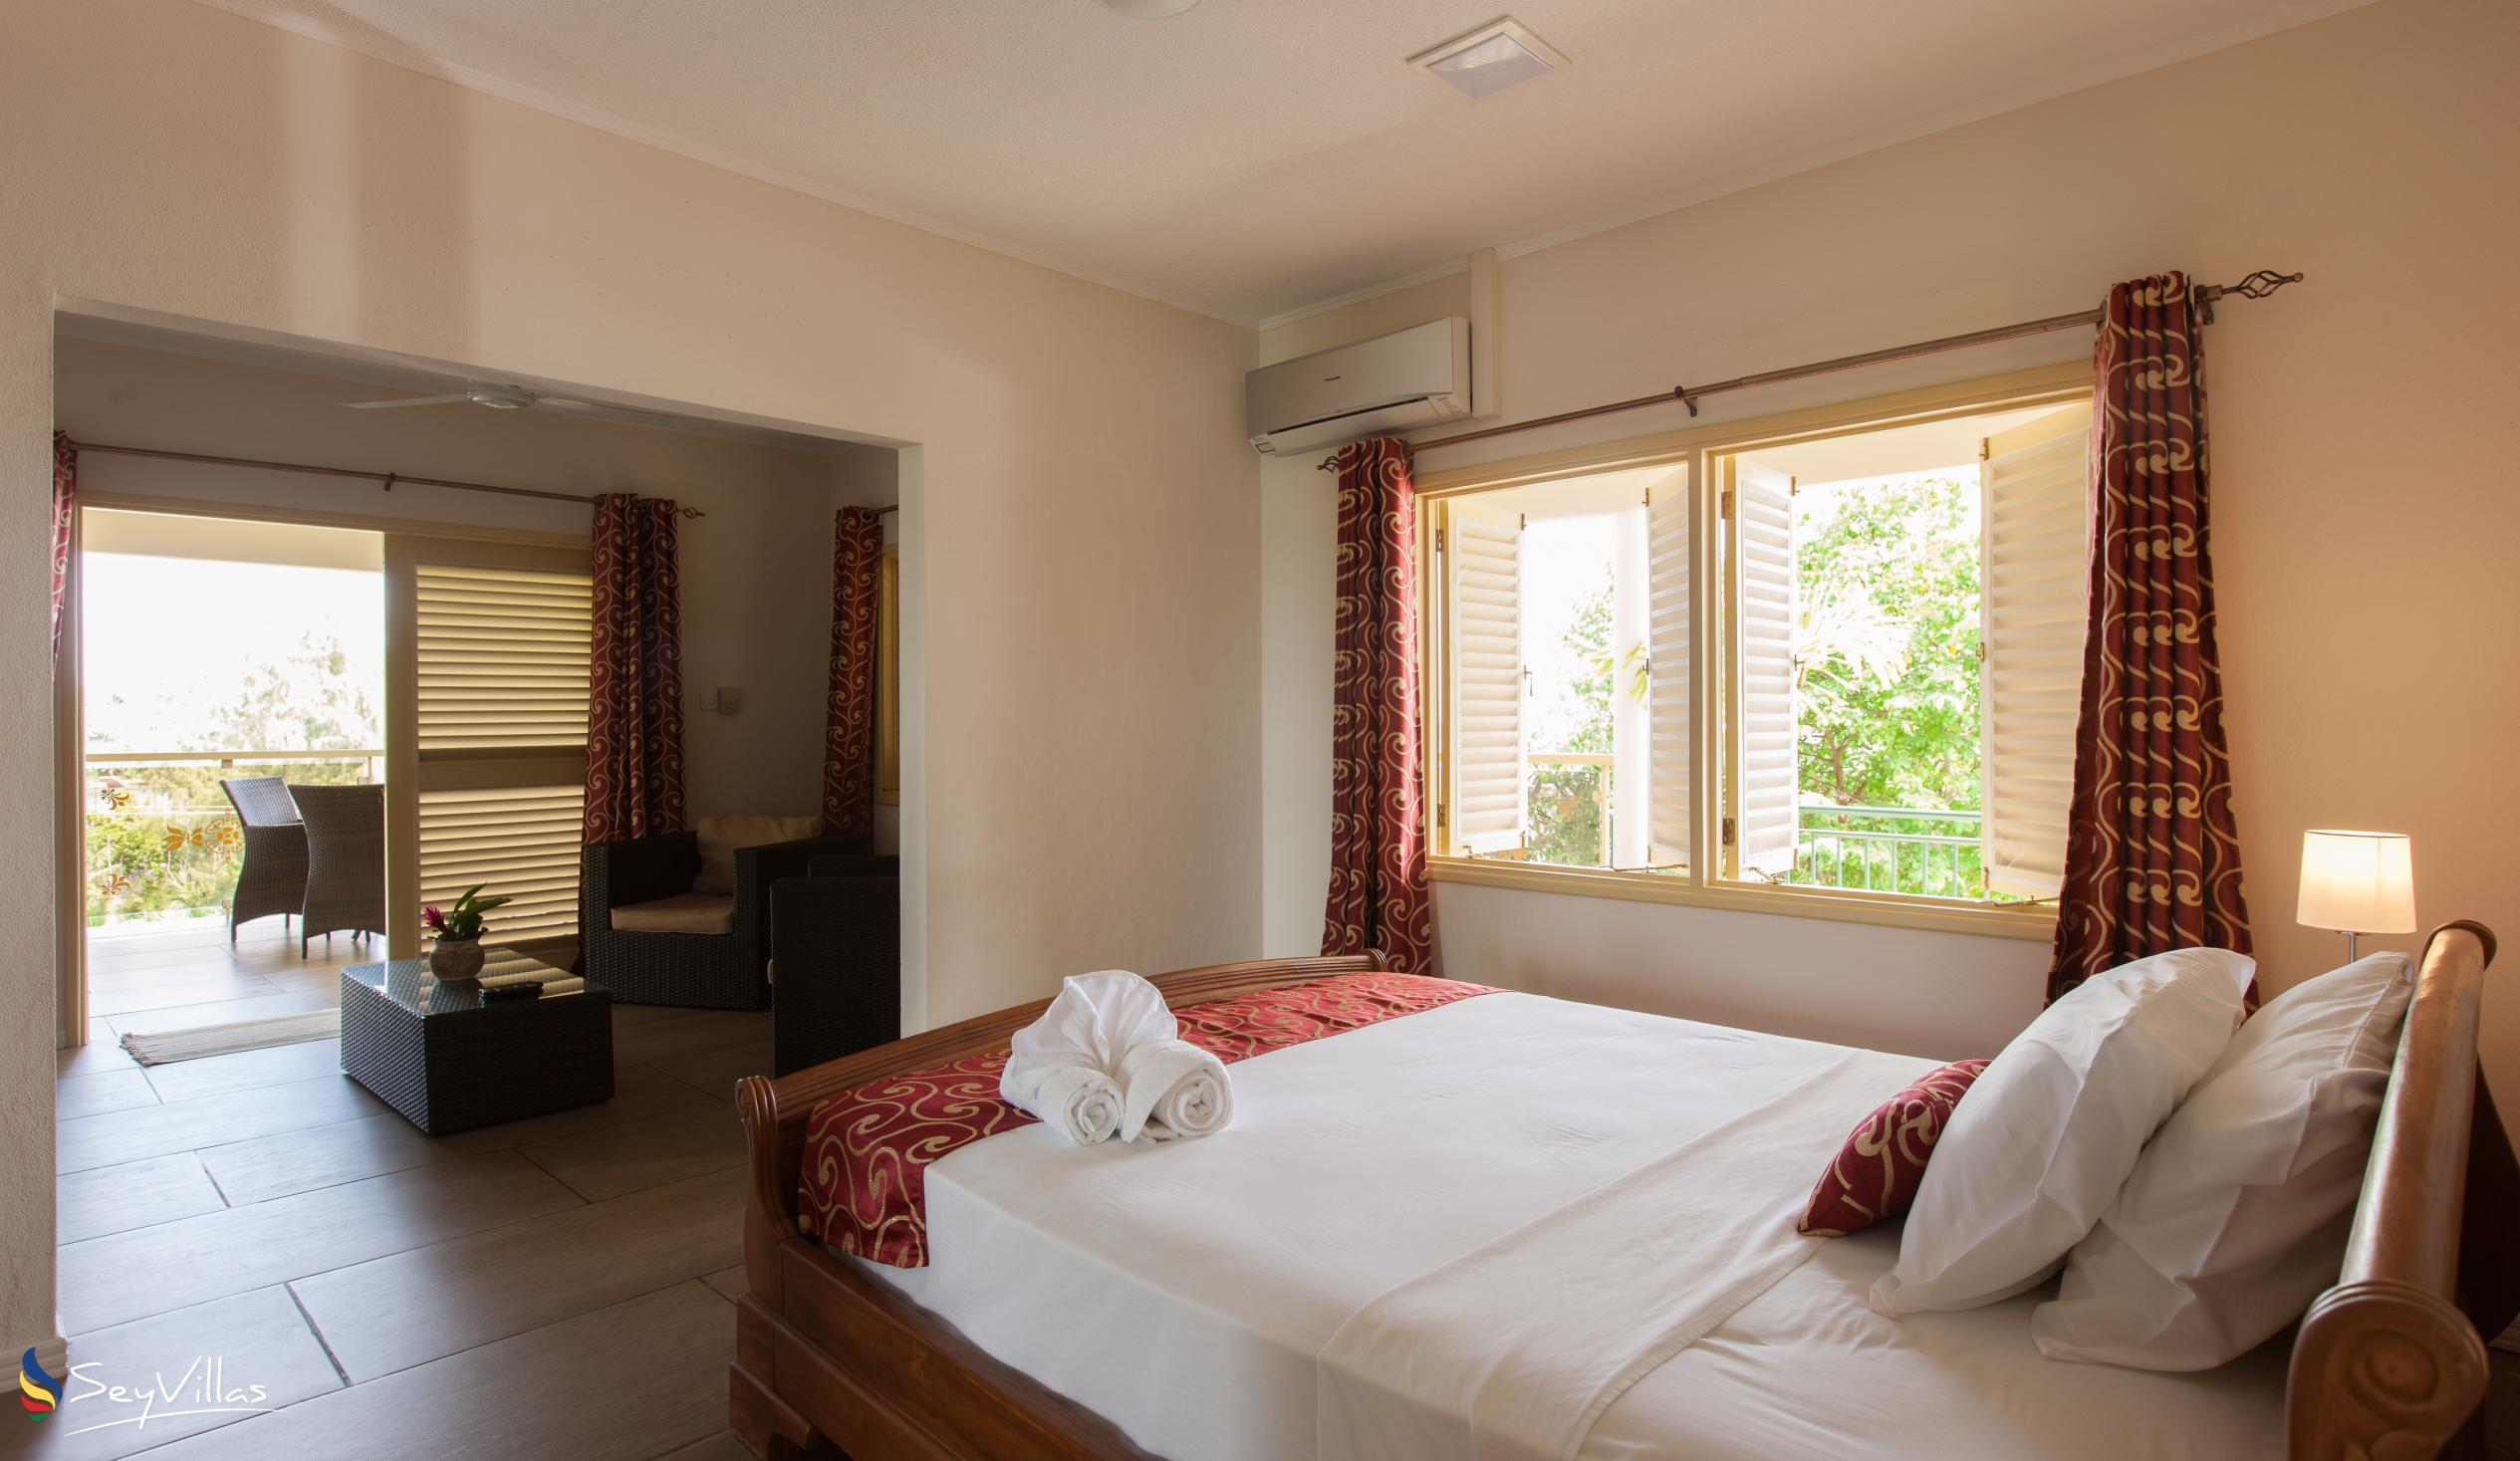 Photo 33: Summer Self Catering - Deluxe Apartment - Praslin (Seychelles)